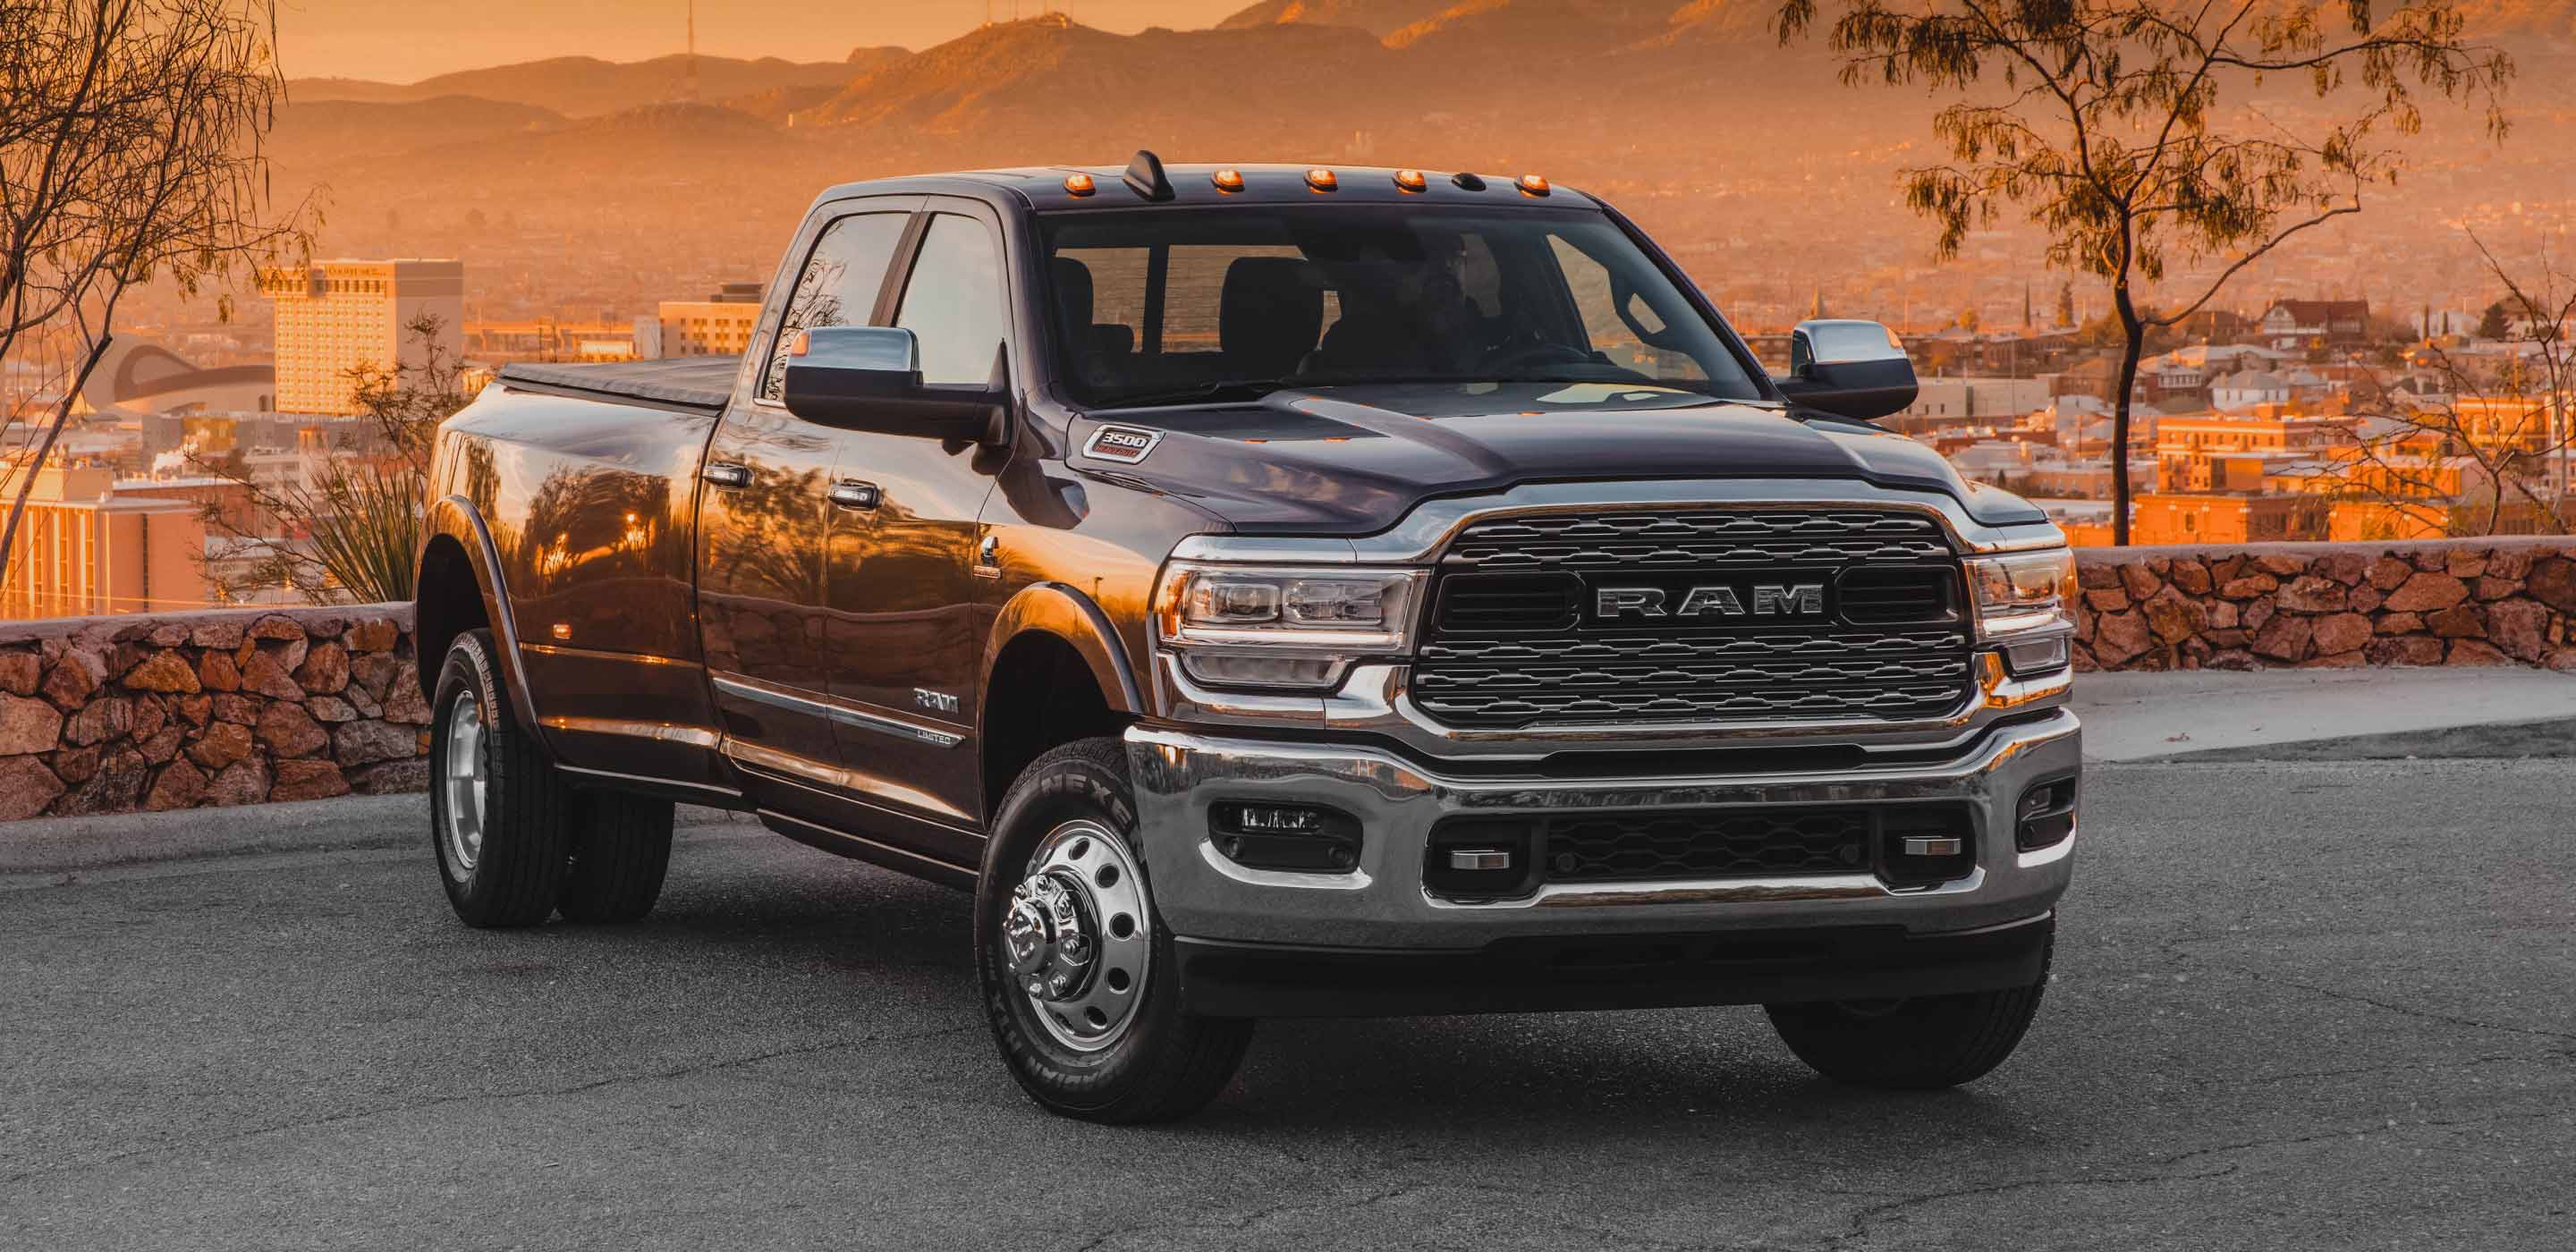 The 2022 Ram 3500 parked at a lookout point at sunset.